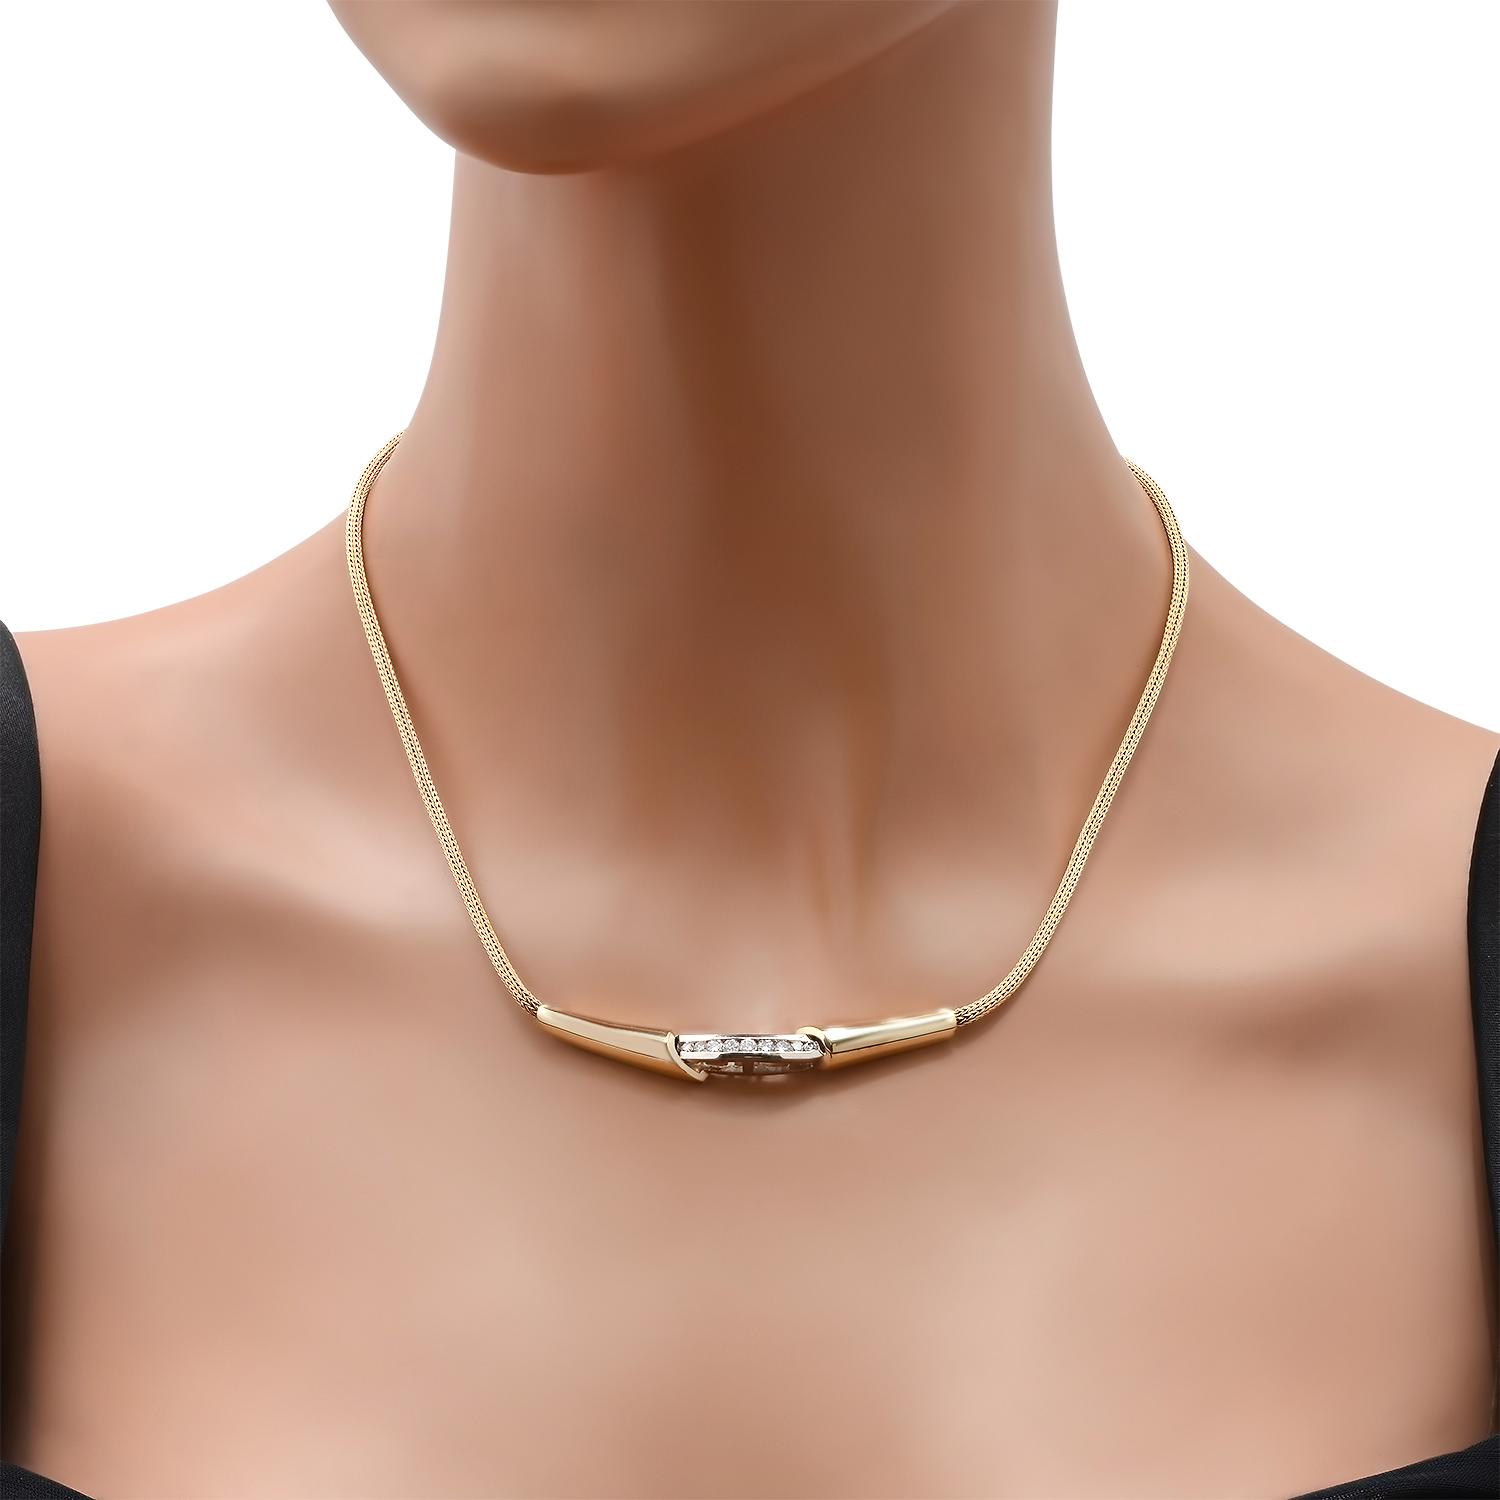 14K Yellow and White Gold Setting with 0.50ct Diamond Necklace